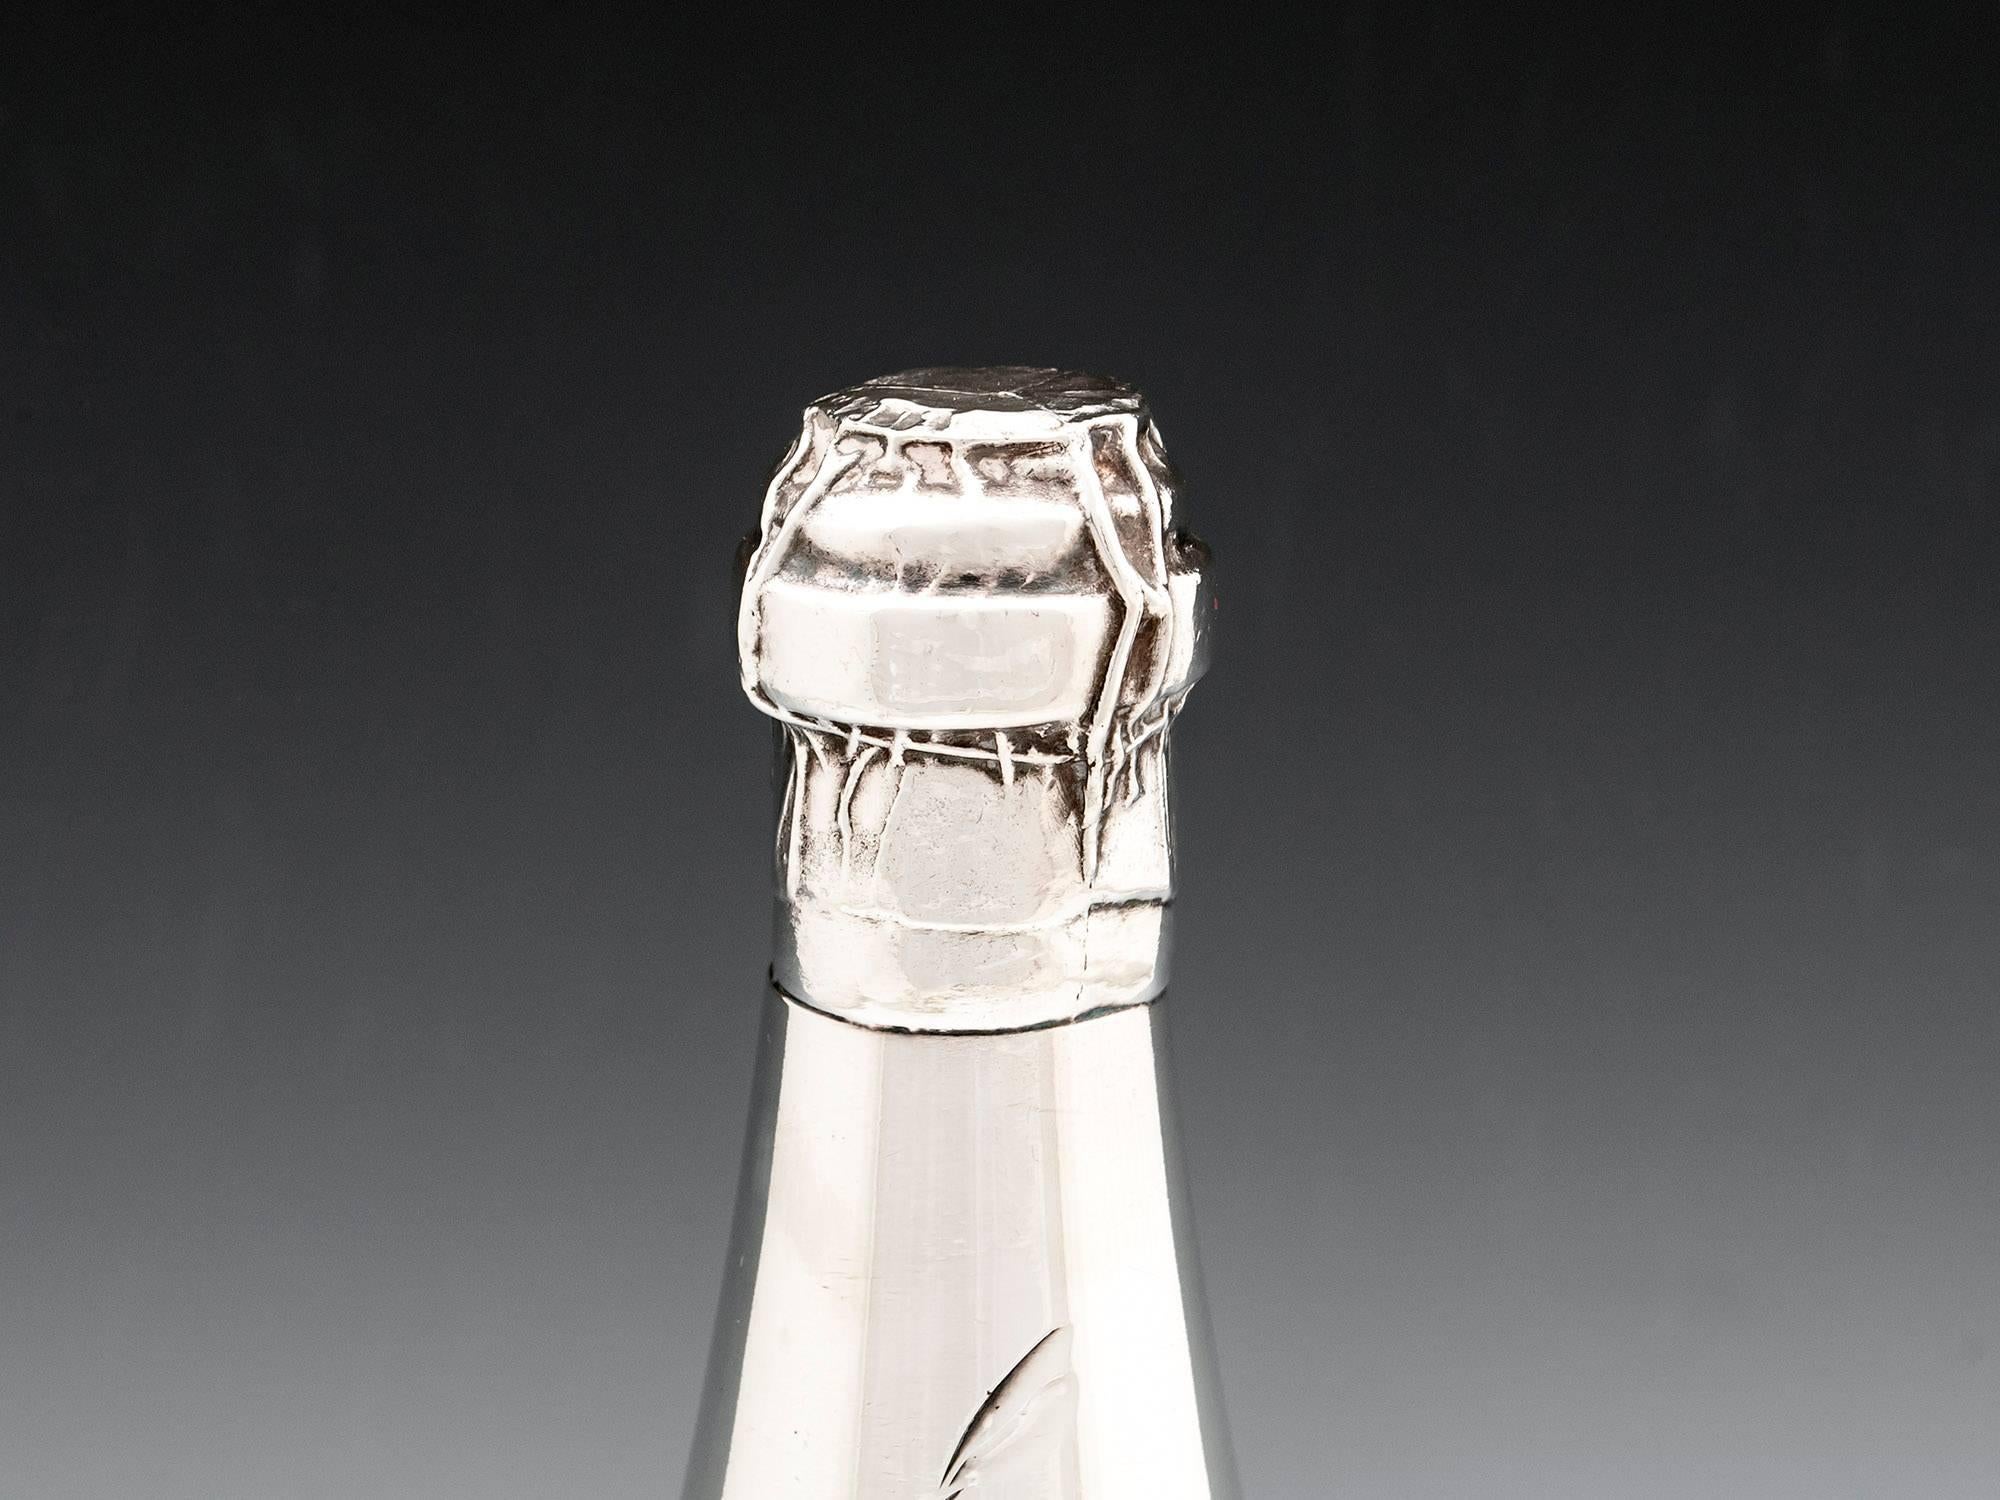 American Art Deco Cigar Holder Champagne Bottle by Pairpoint Bros, 20th Century For Sale